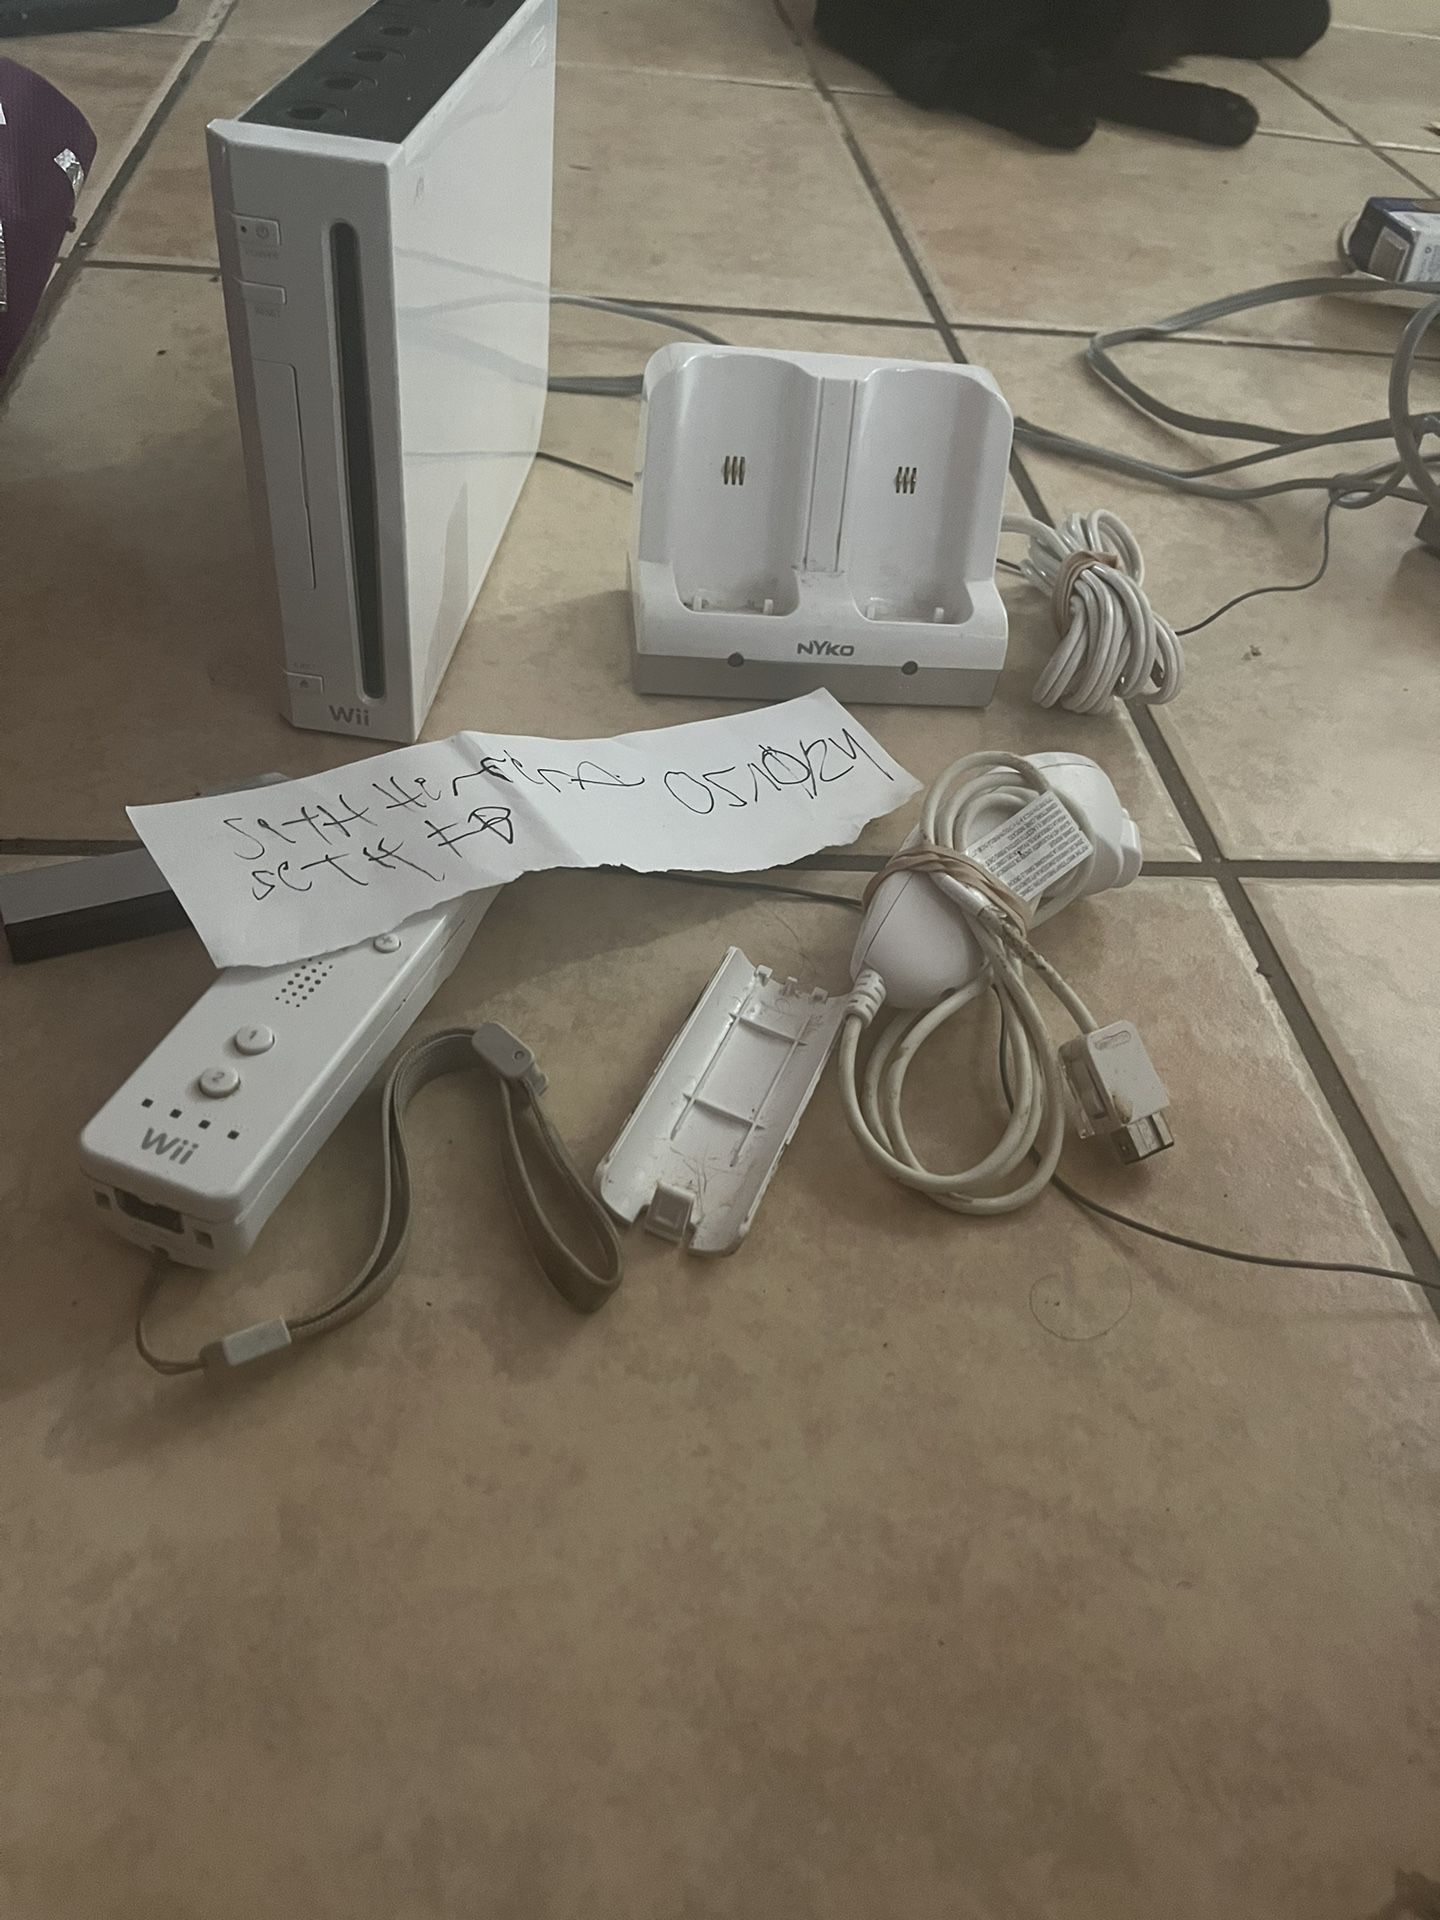  Nintendo Wii W/ Nunchuk, Remote, Remote Charger